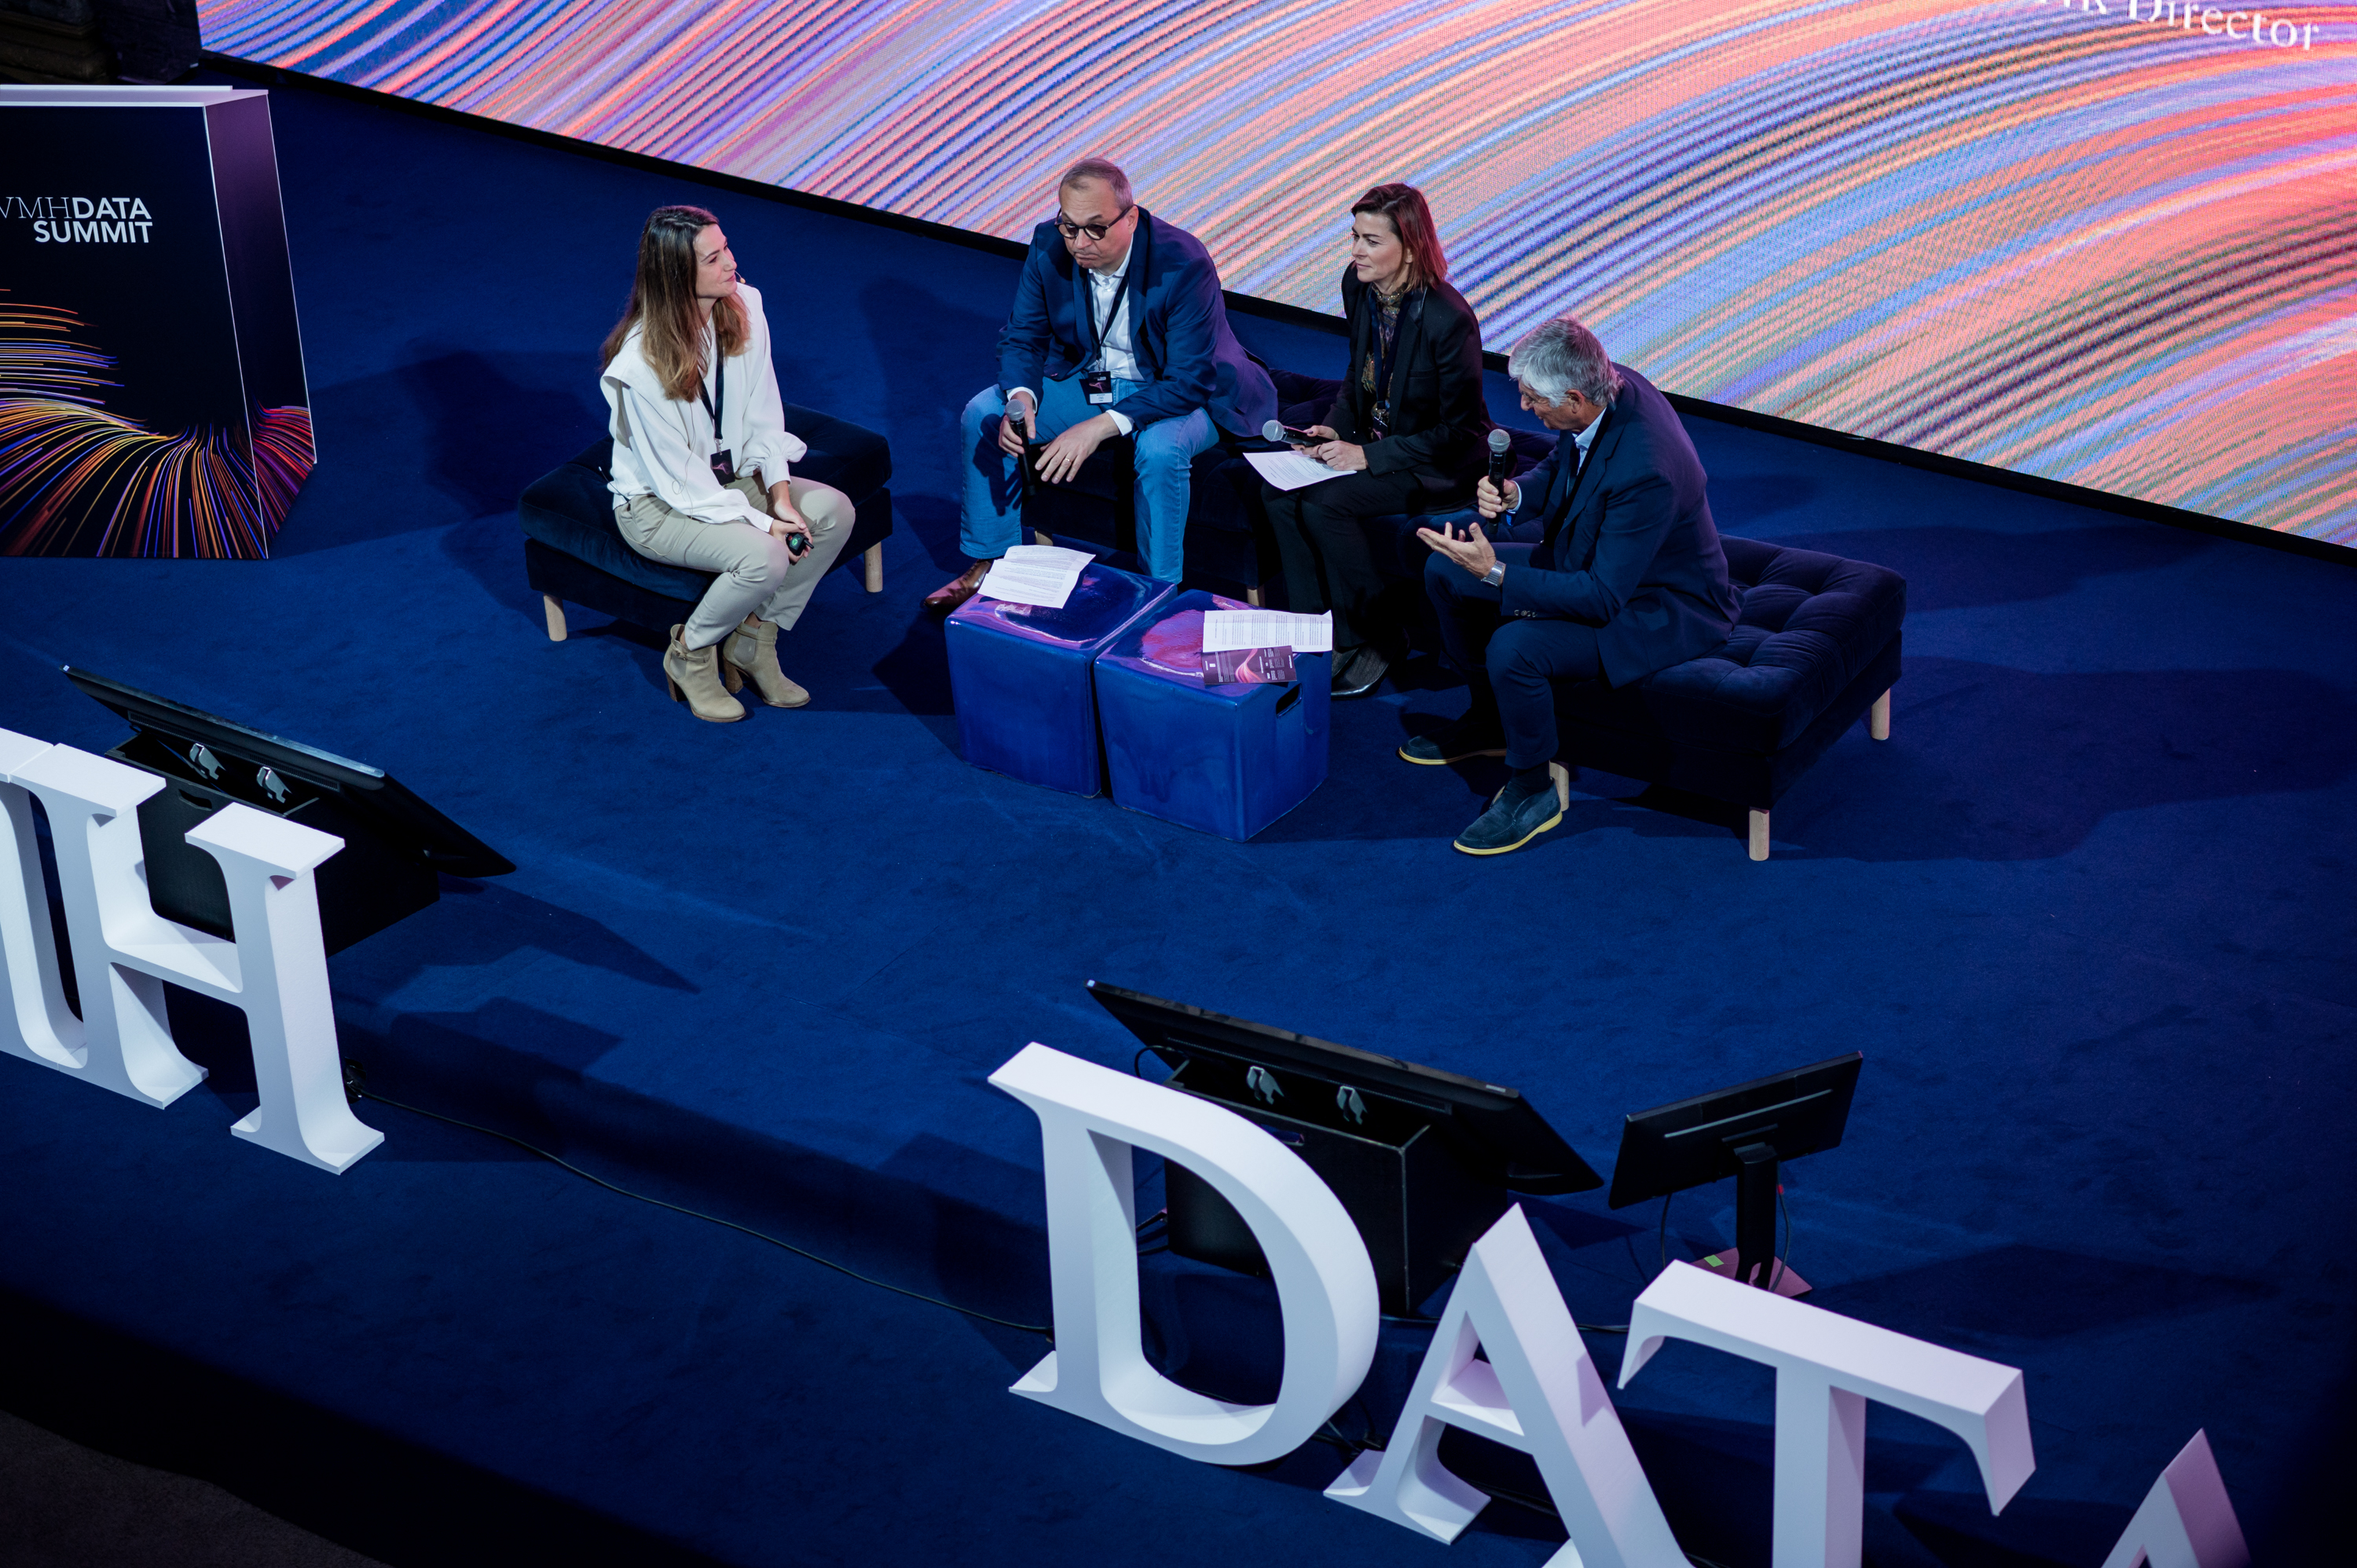 LVMH on X: LVMH and its Maisons take part in the first edition of LVMH  Data Summit, from November 14 to 16, being part of a global strategy to  accelerate the contributions